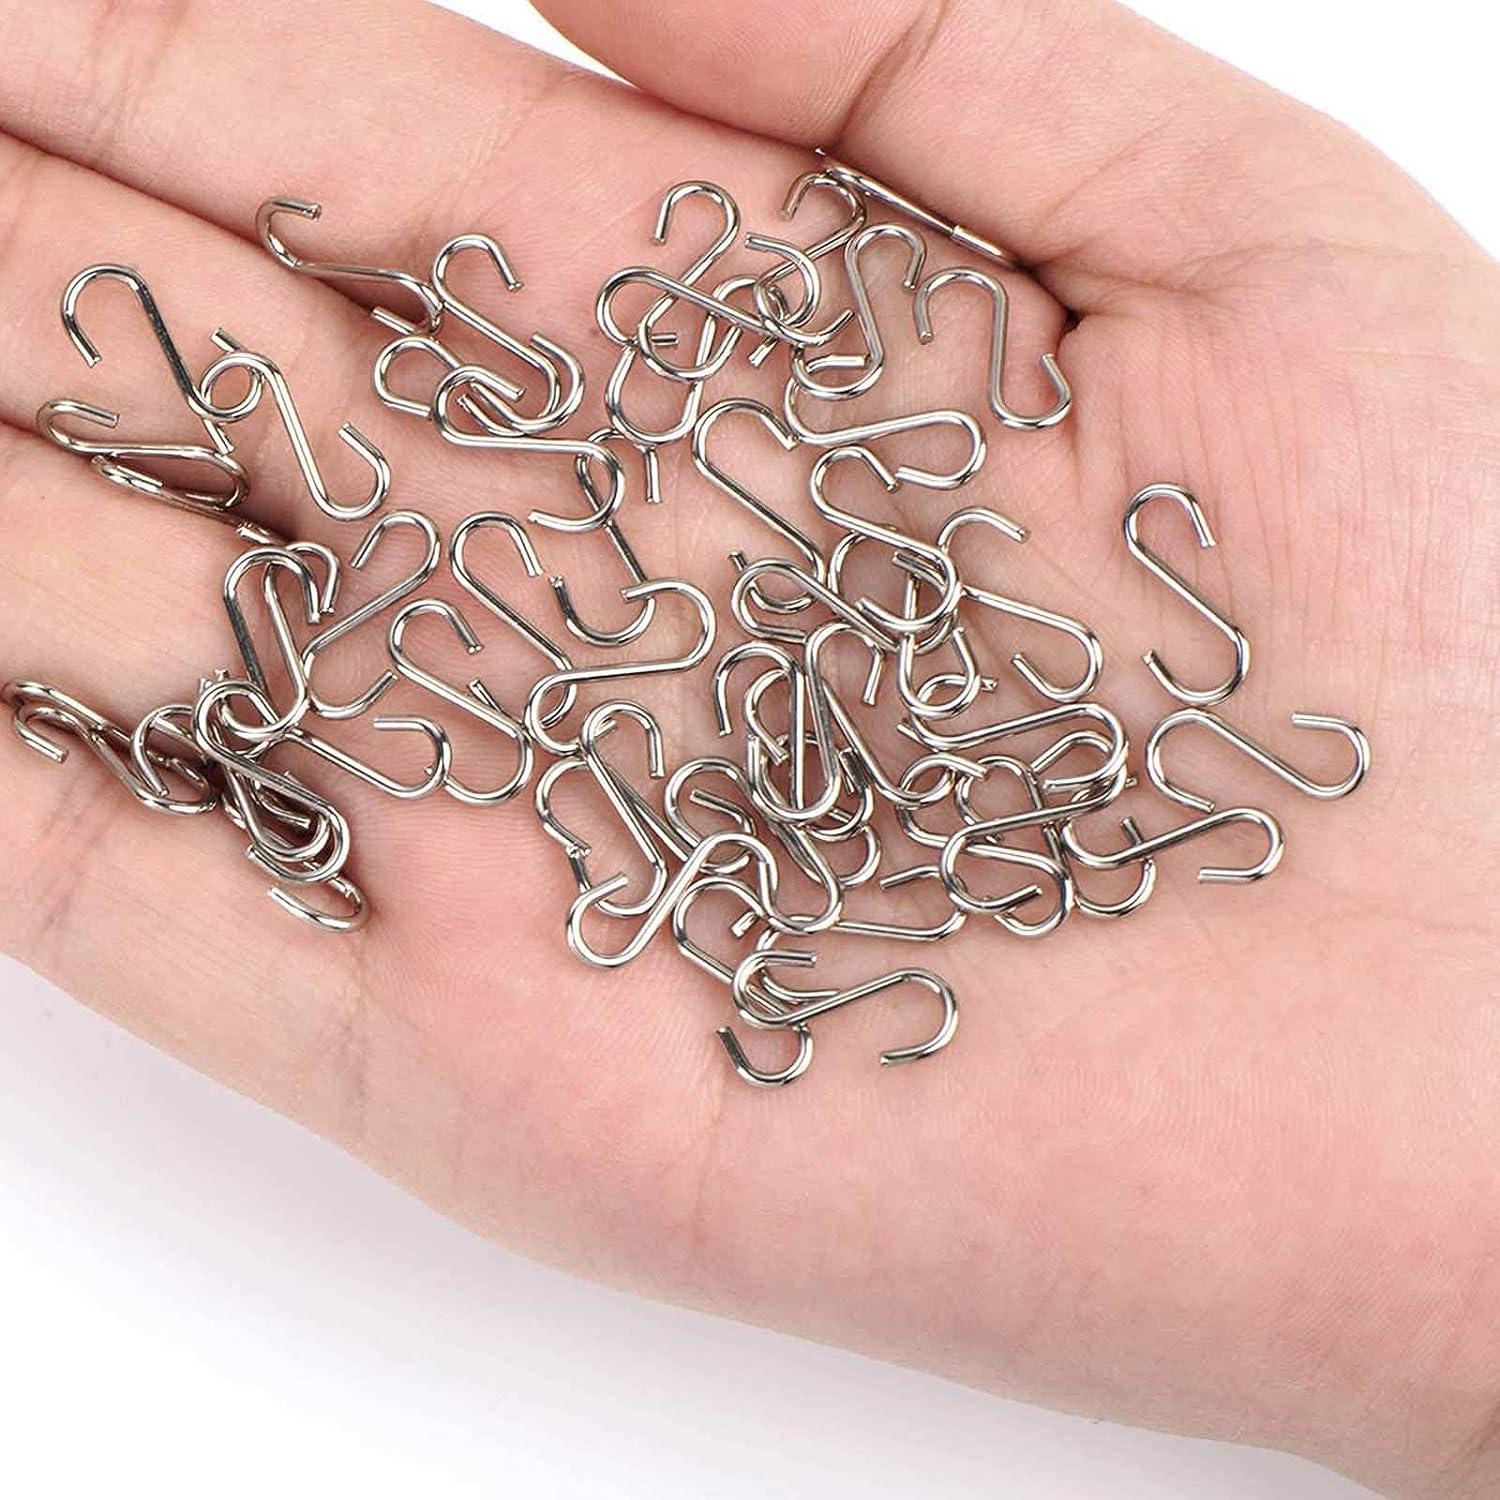 Millennial Essentials Mini S Hooks Connectors S Shaped Wire Hook Hangers  200pcs Hanging Hooks for DIY Crafts, Hanging Jewelry, Key Chain, Tags